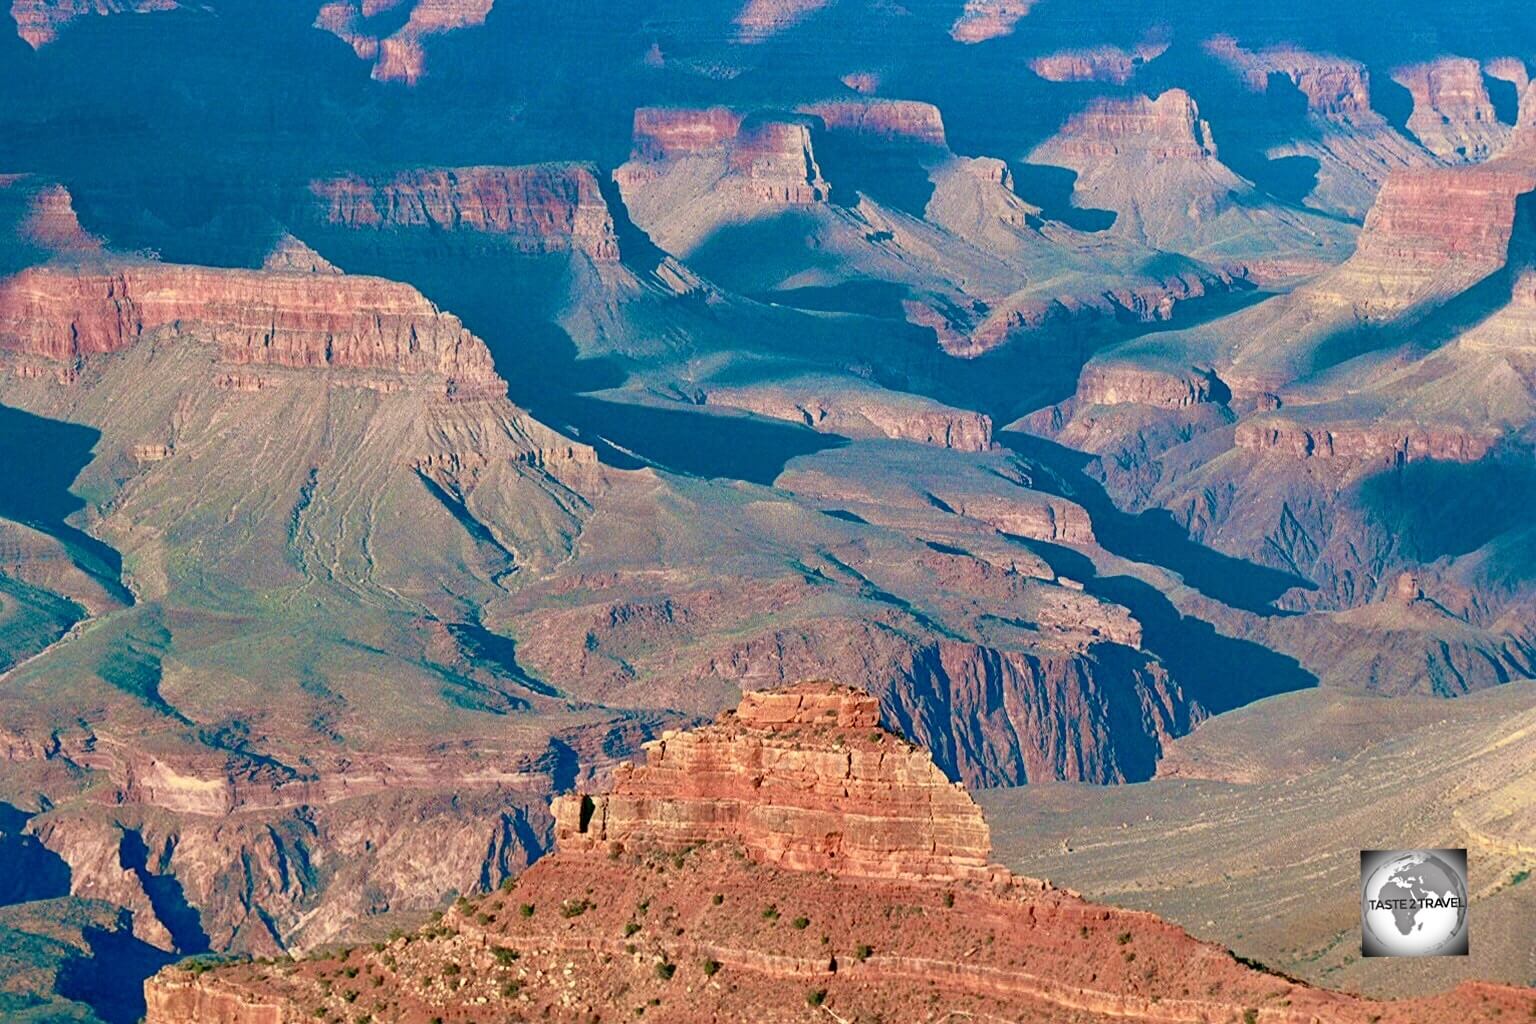 The Grand Canyon is one of 1,154 UNESCO World Heritage Sites.